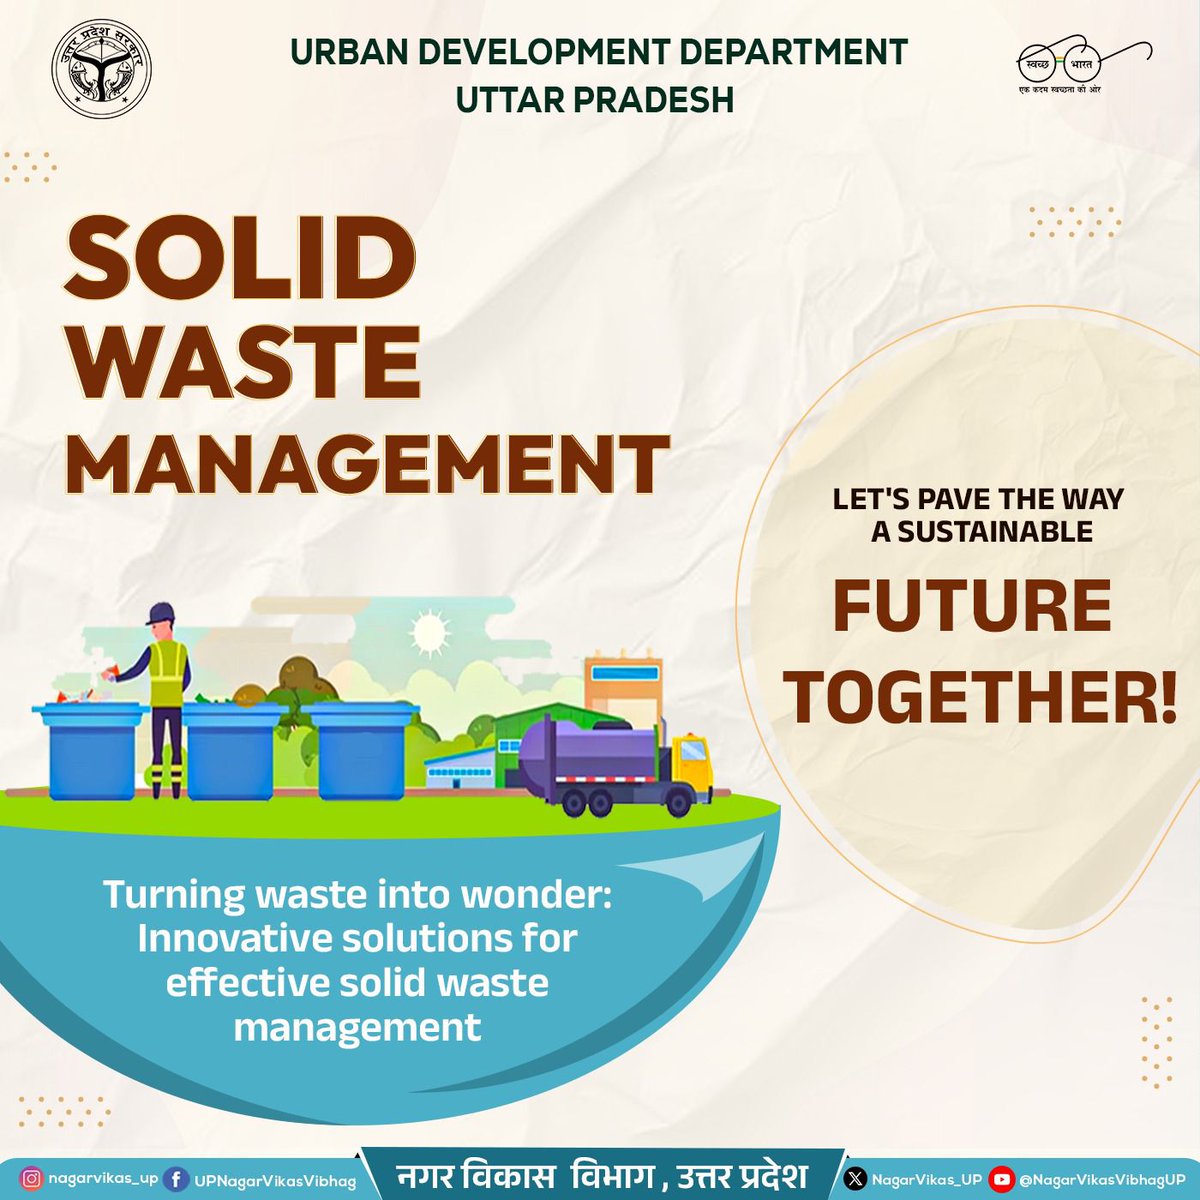 🌟 Solid Waste Management: Transforming Waste into Wonder! 🌟

Join us in creating a sustainable future with innovative waste management solutions! Let's build a cleaner, greener Uttar Pradesh together. 🌍♻️

#SolidWasteManagement #UttarPradesh #NagarVikas_UP